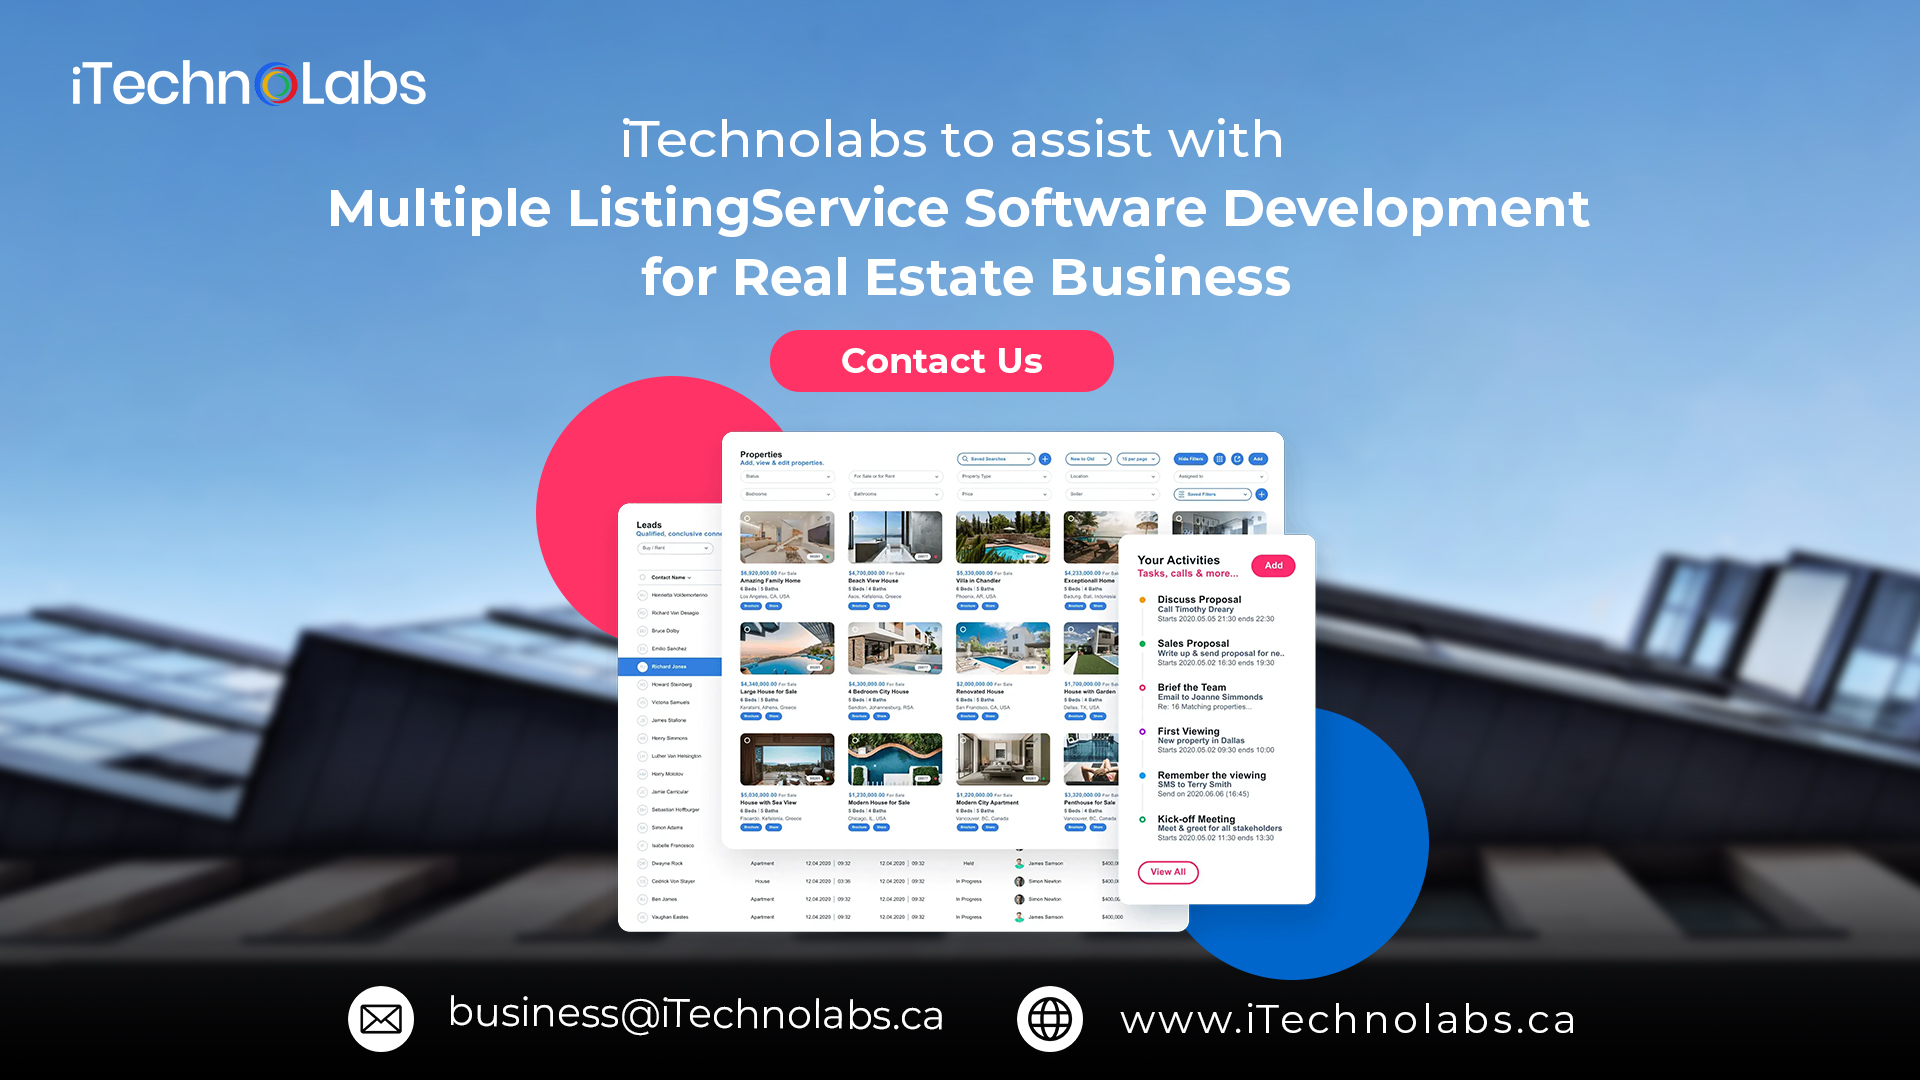 itechnolabs to assist with multiple listing service software development for real estate business